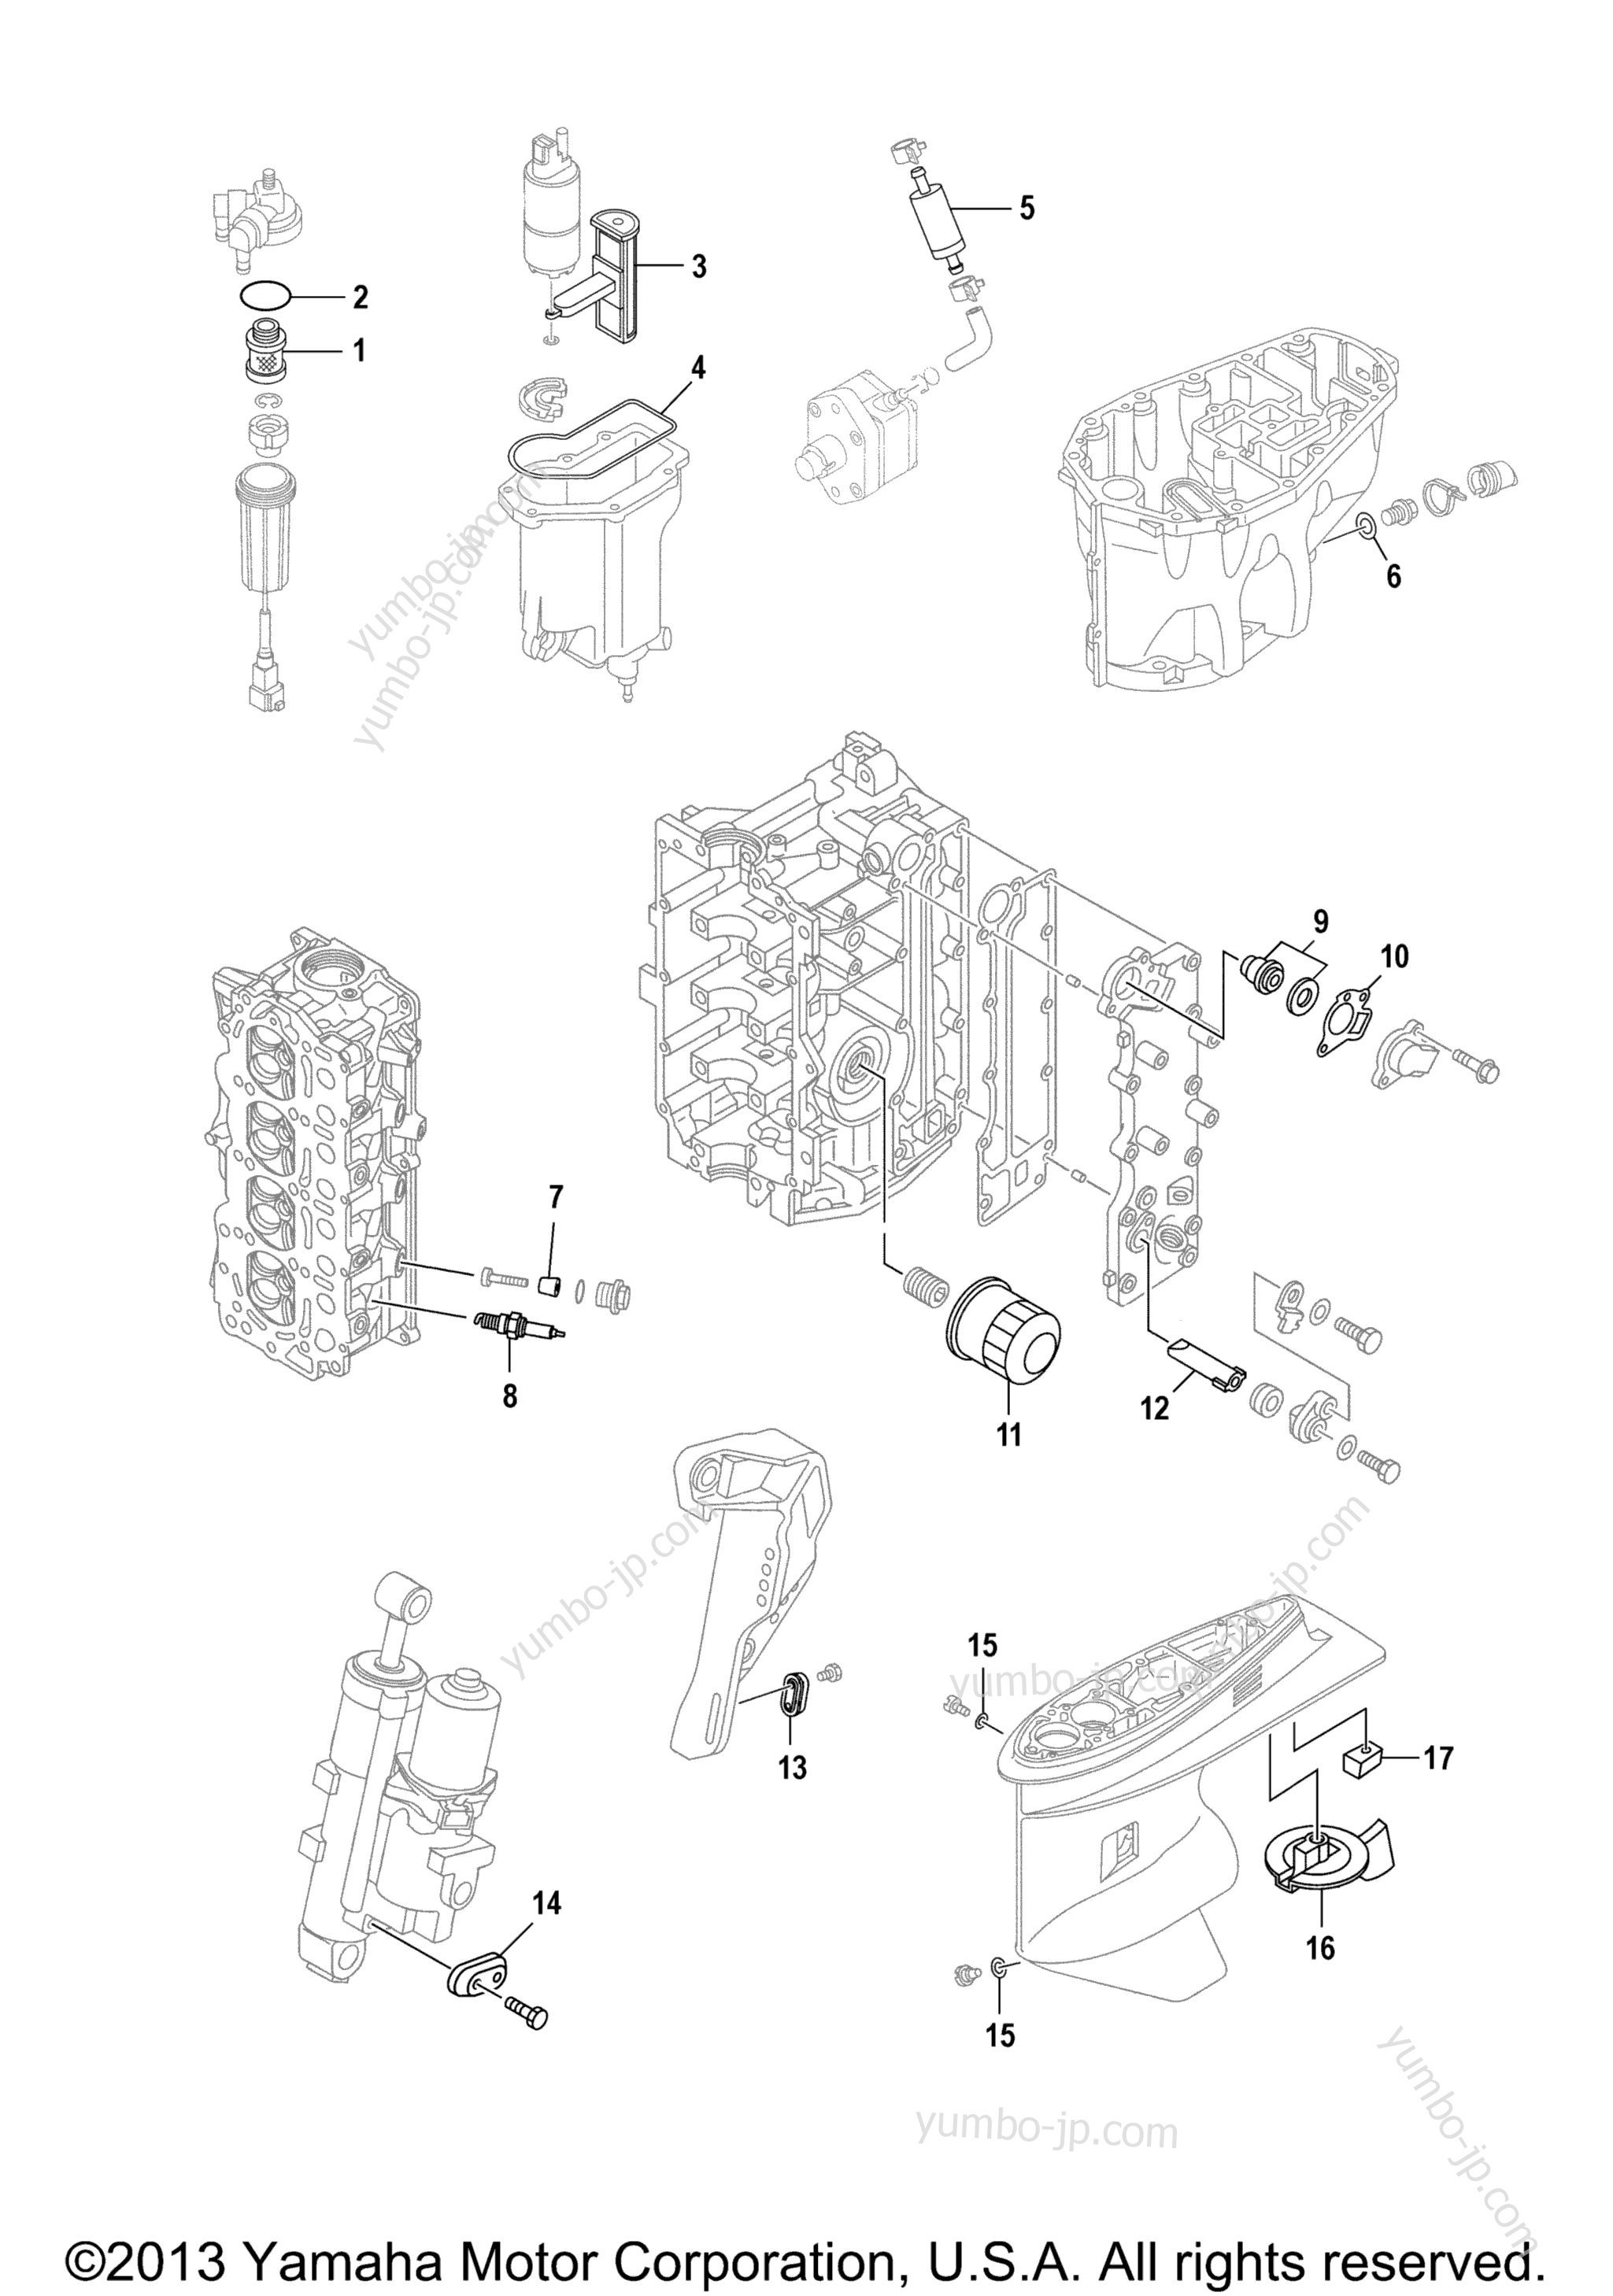 Scheduled Service Parts for outboards YAMAHA F60LA_0112 (0112) 2006 year